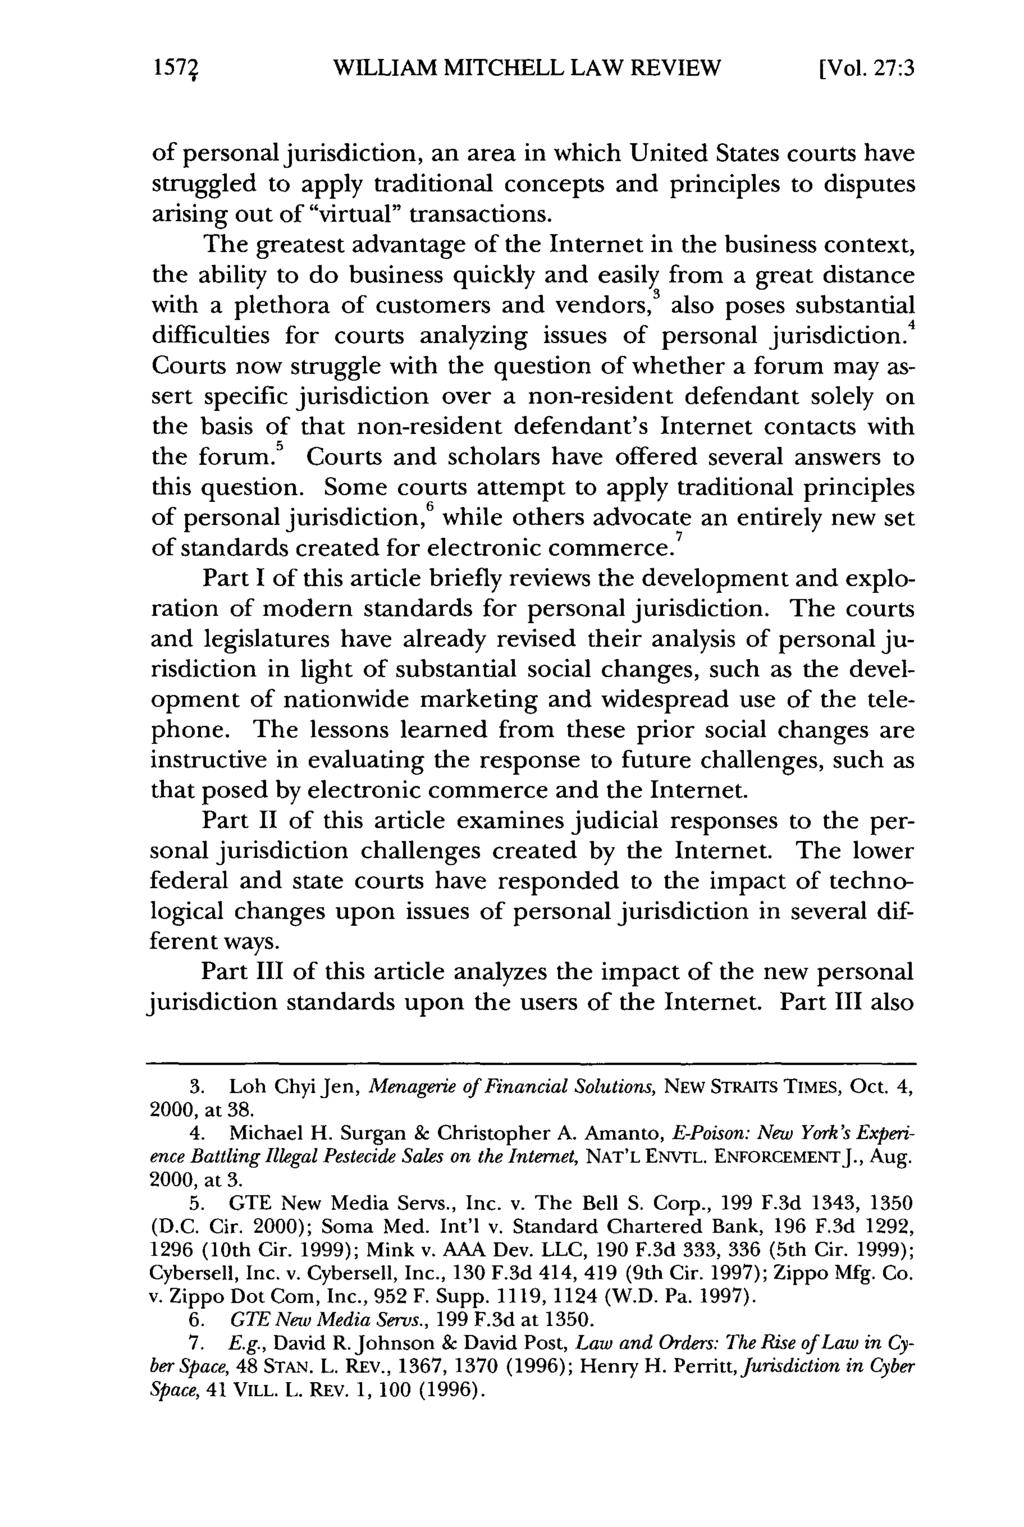 157; William WILLIAM Mitchell Law MITCHELL Review, Vol. 27, LAW Iss. 3 [2001], REVIEW Art. 13 [Vol.